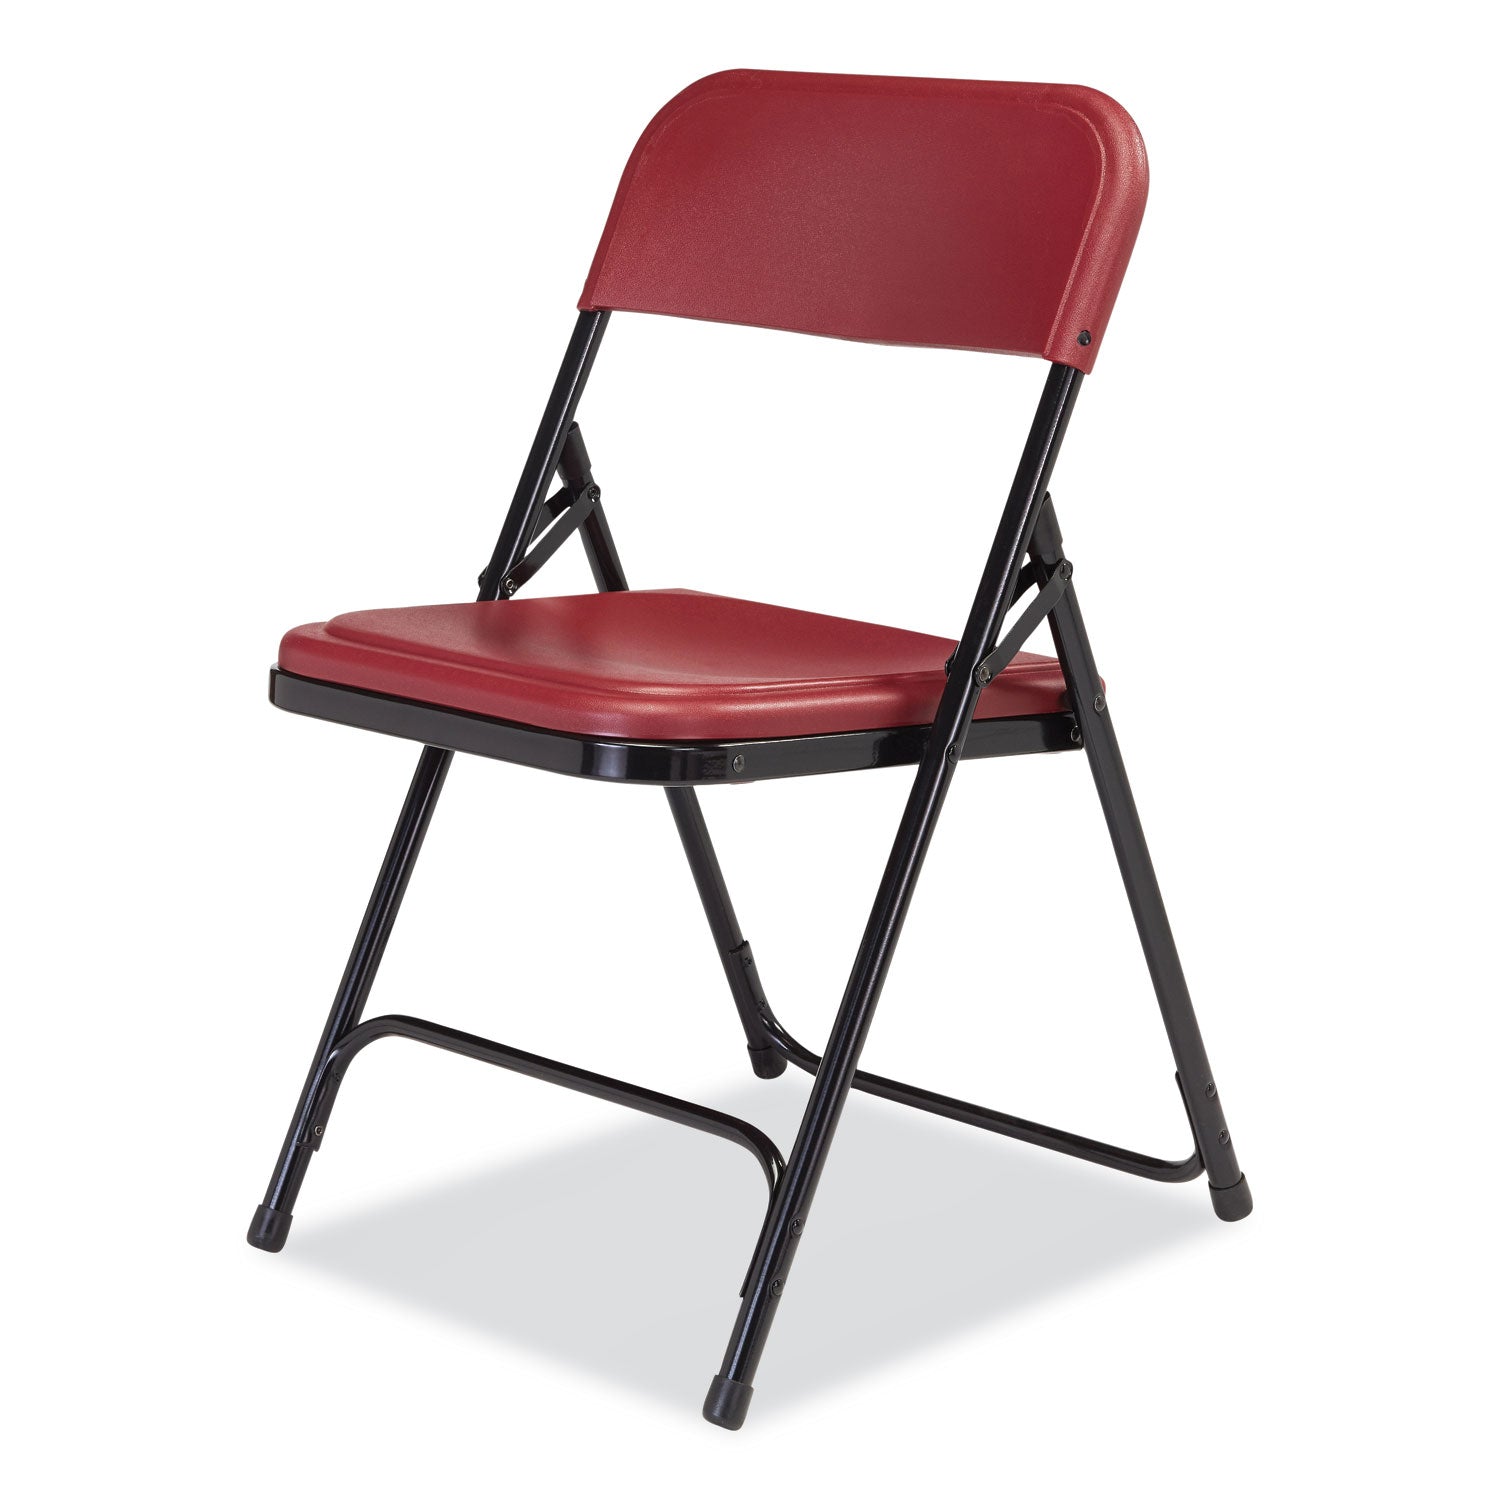 800-series-plastic-folding-chair-supports-500-lb-18-seat-ht-burgundy-seat-back-black-base-4-ct-ships-in-1-3-bus-days_nps818 - 3